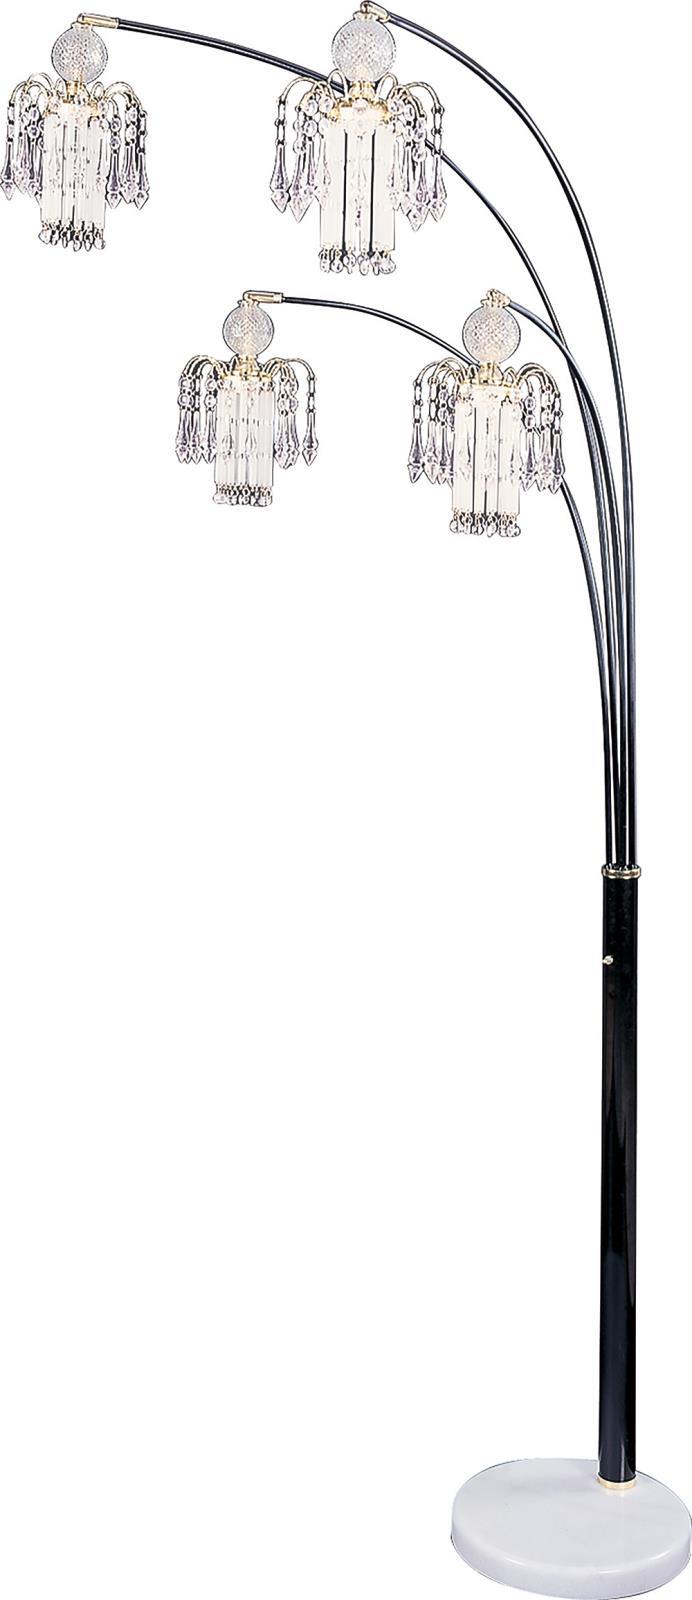 Maisel Floor Lamp With 4 Staggered Shades Black - Ella Furniture